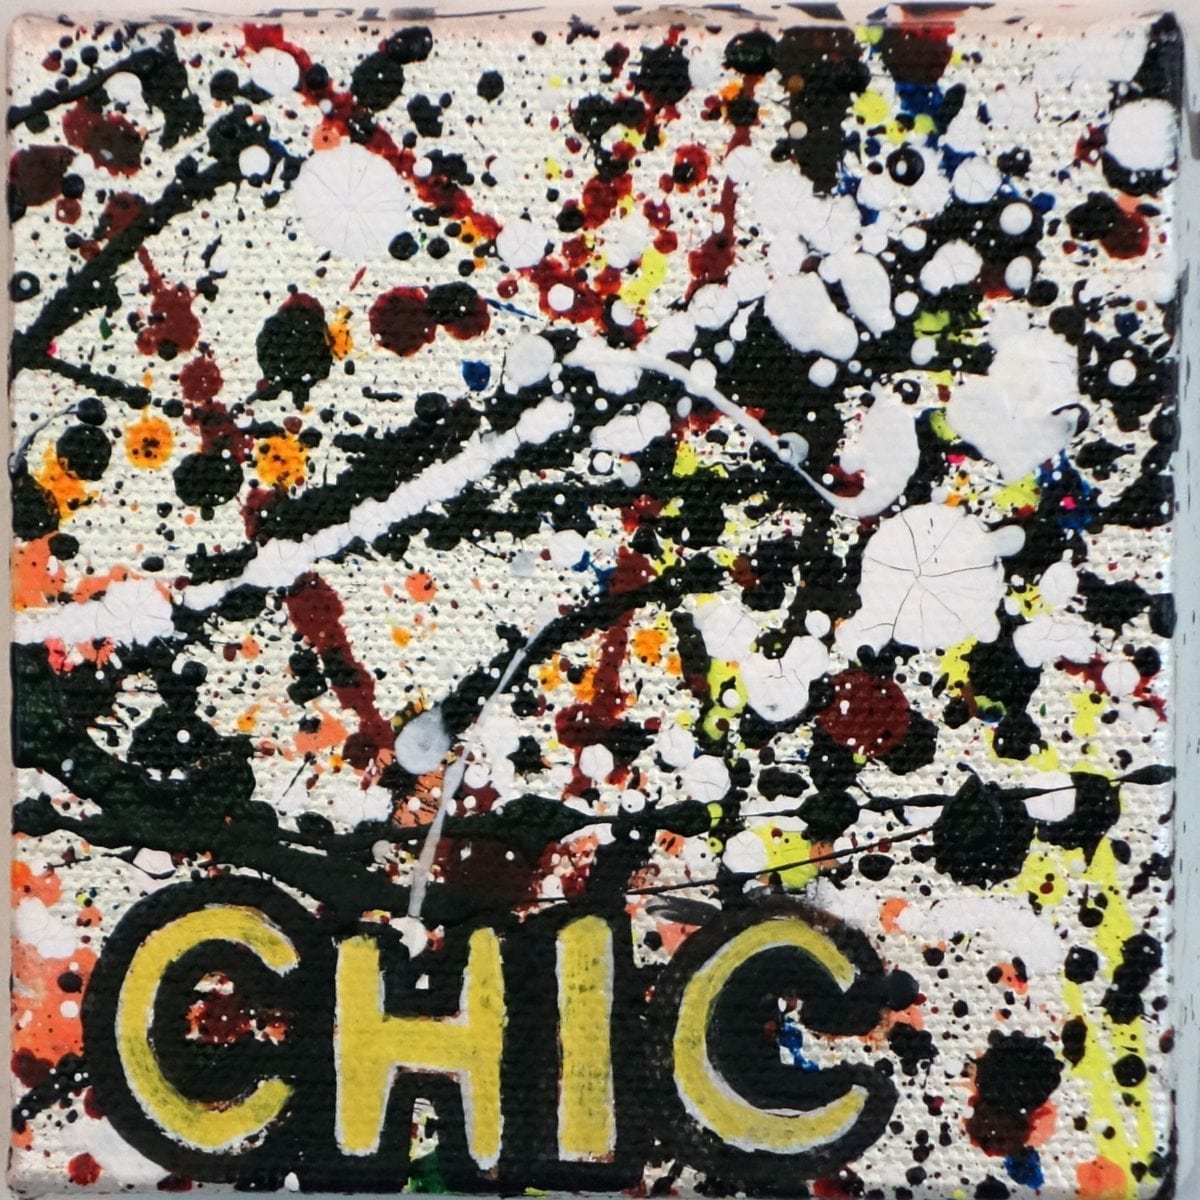 Betty Tompkins, Chic, 2015. Courtesy of the artist and P.P.O.W